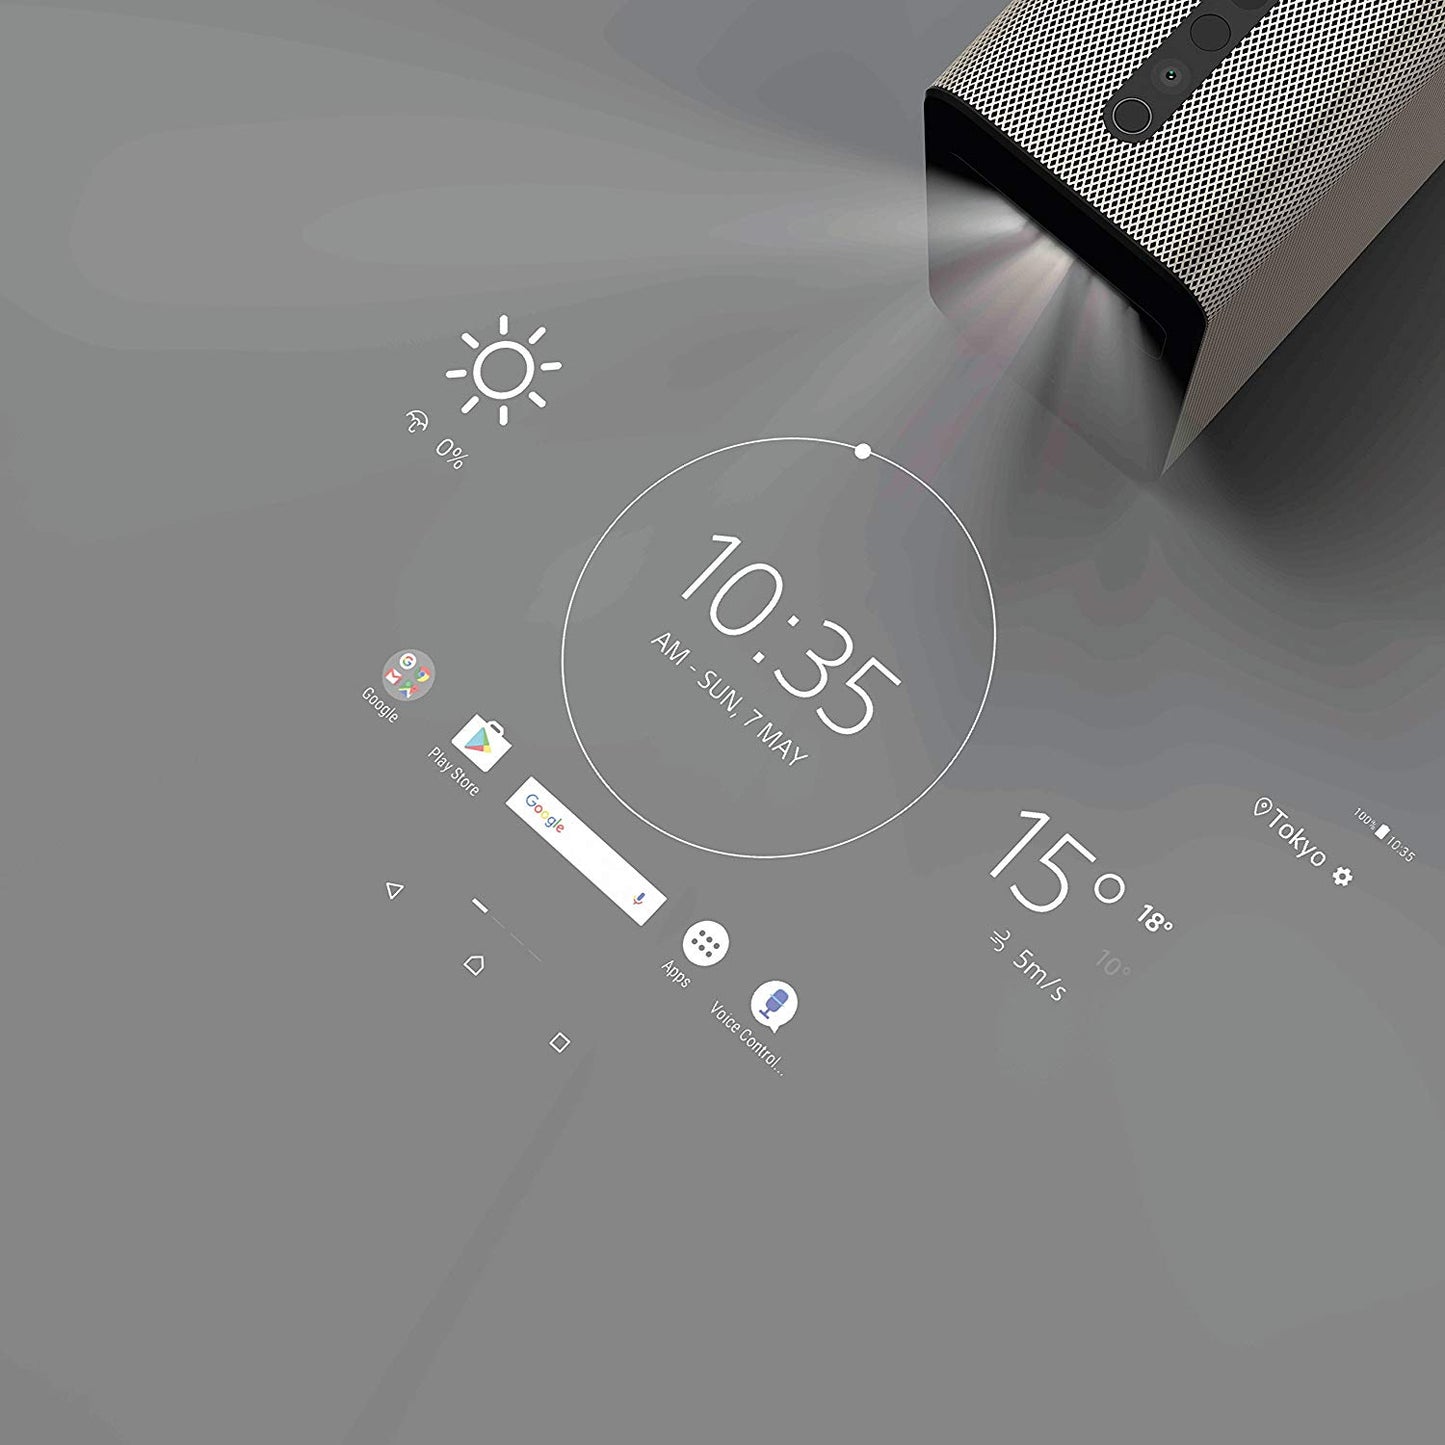 Sony Xperia Touch - Proyector táctil con Android G1109 - 1308-9682